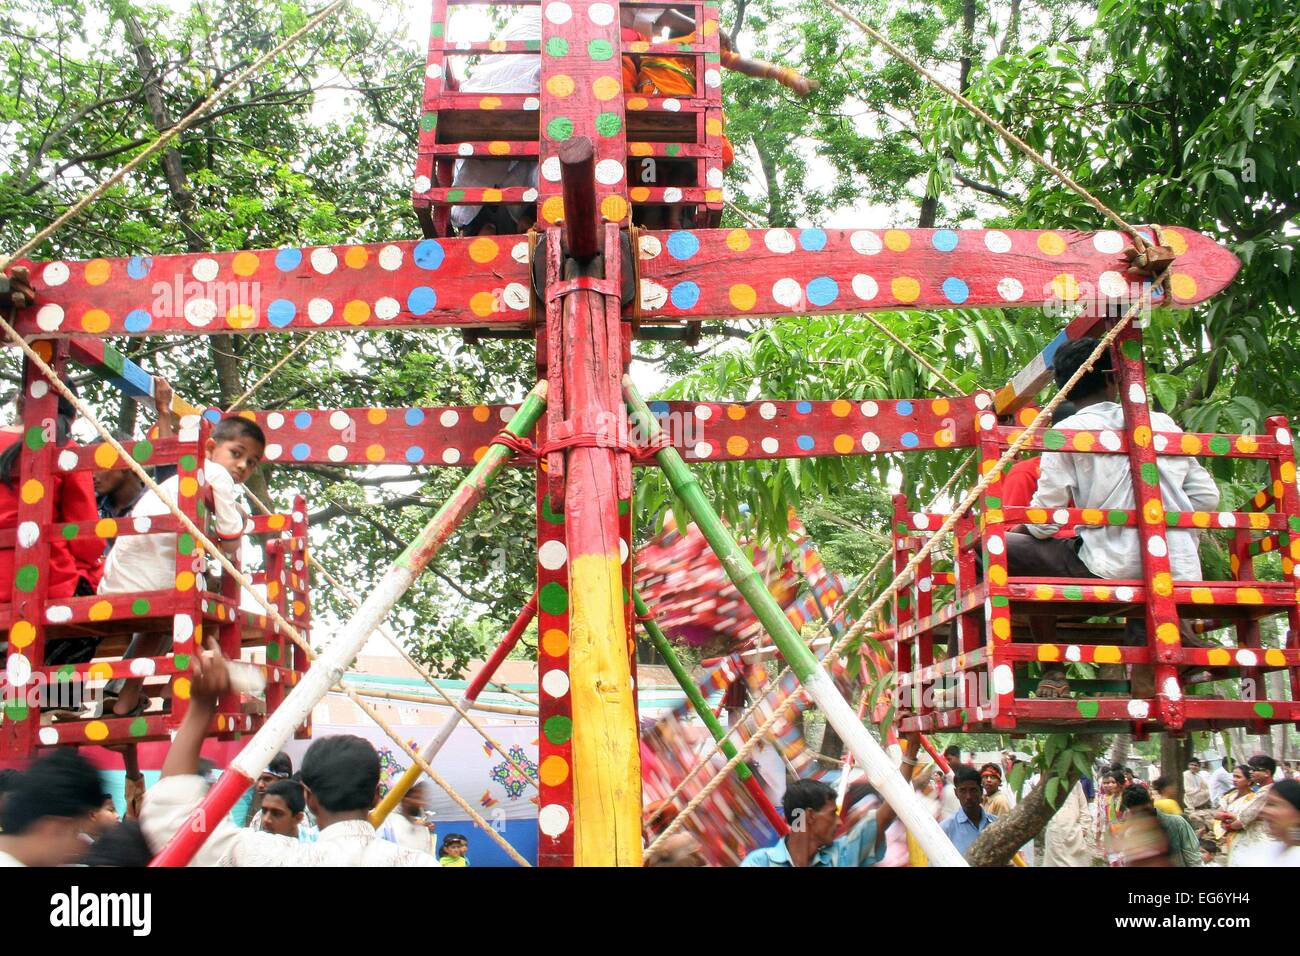 A Ferris wheel, locally known as 'Charka', at a fair, in Dhaka city..  First day of Baisakh is celebrated as a Bangla new year b Stock Photo